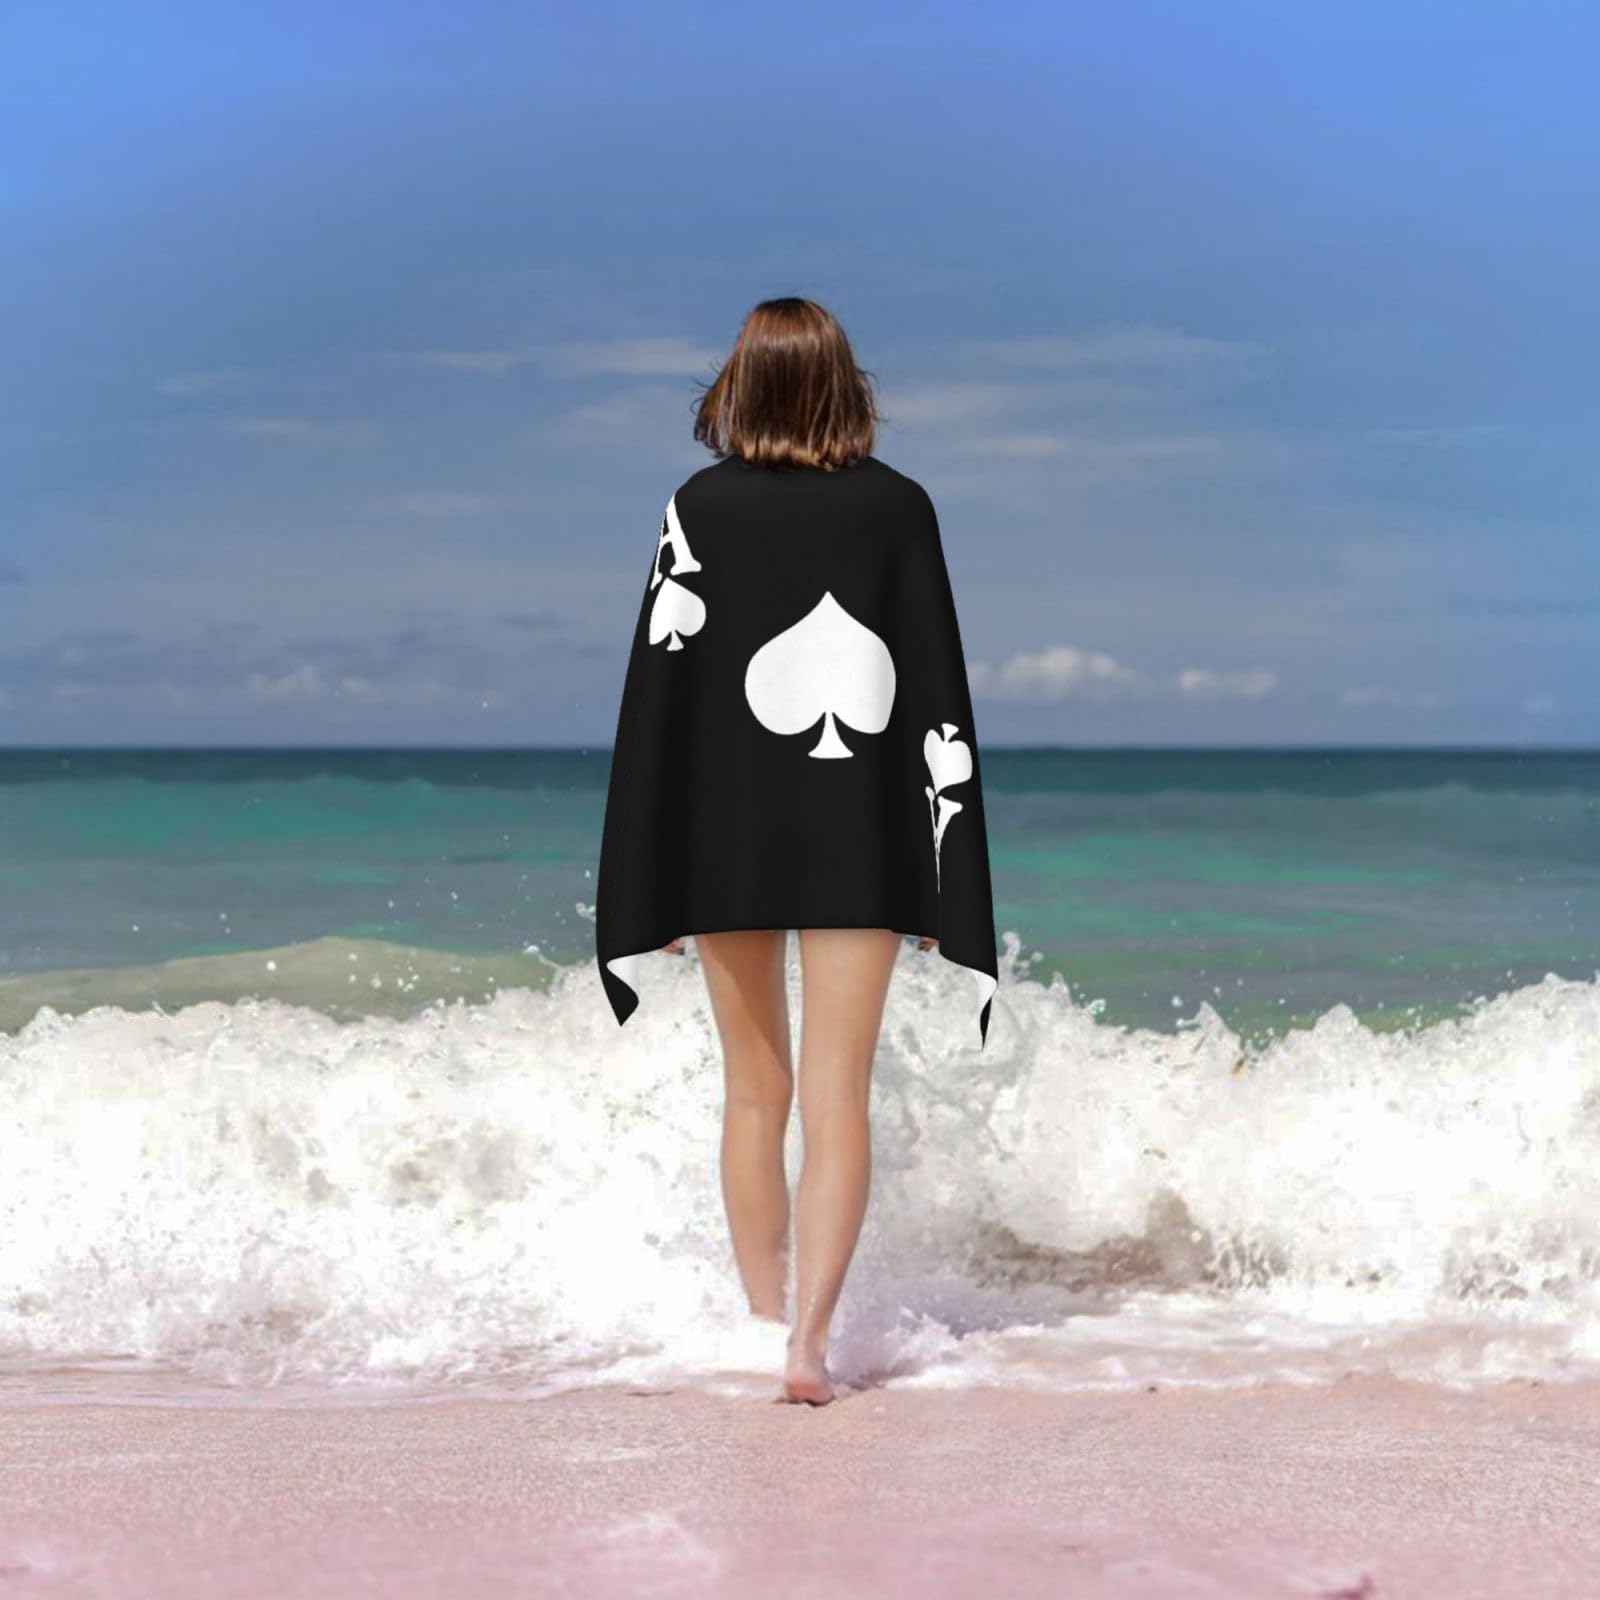 ADOSIA Ace of Spades Poker Beach Towel 32x52in Oversized Soft Absorbent Beach Towel